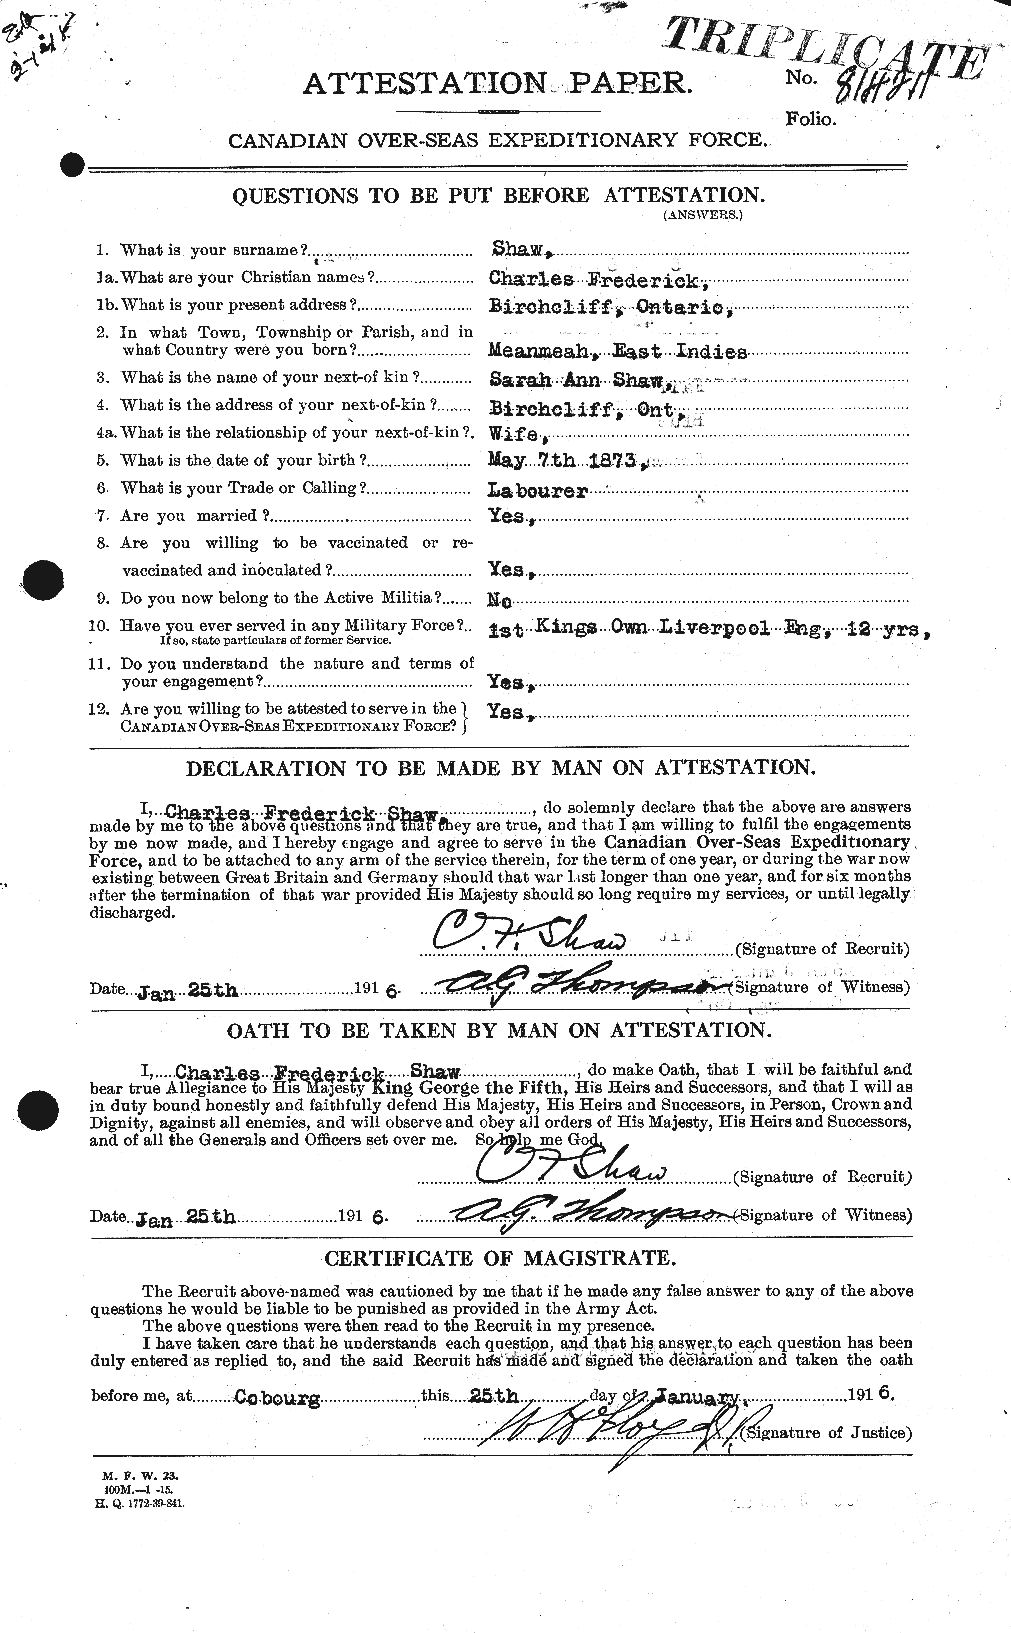 Personnel Records of the First World War - CEF 092979a